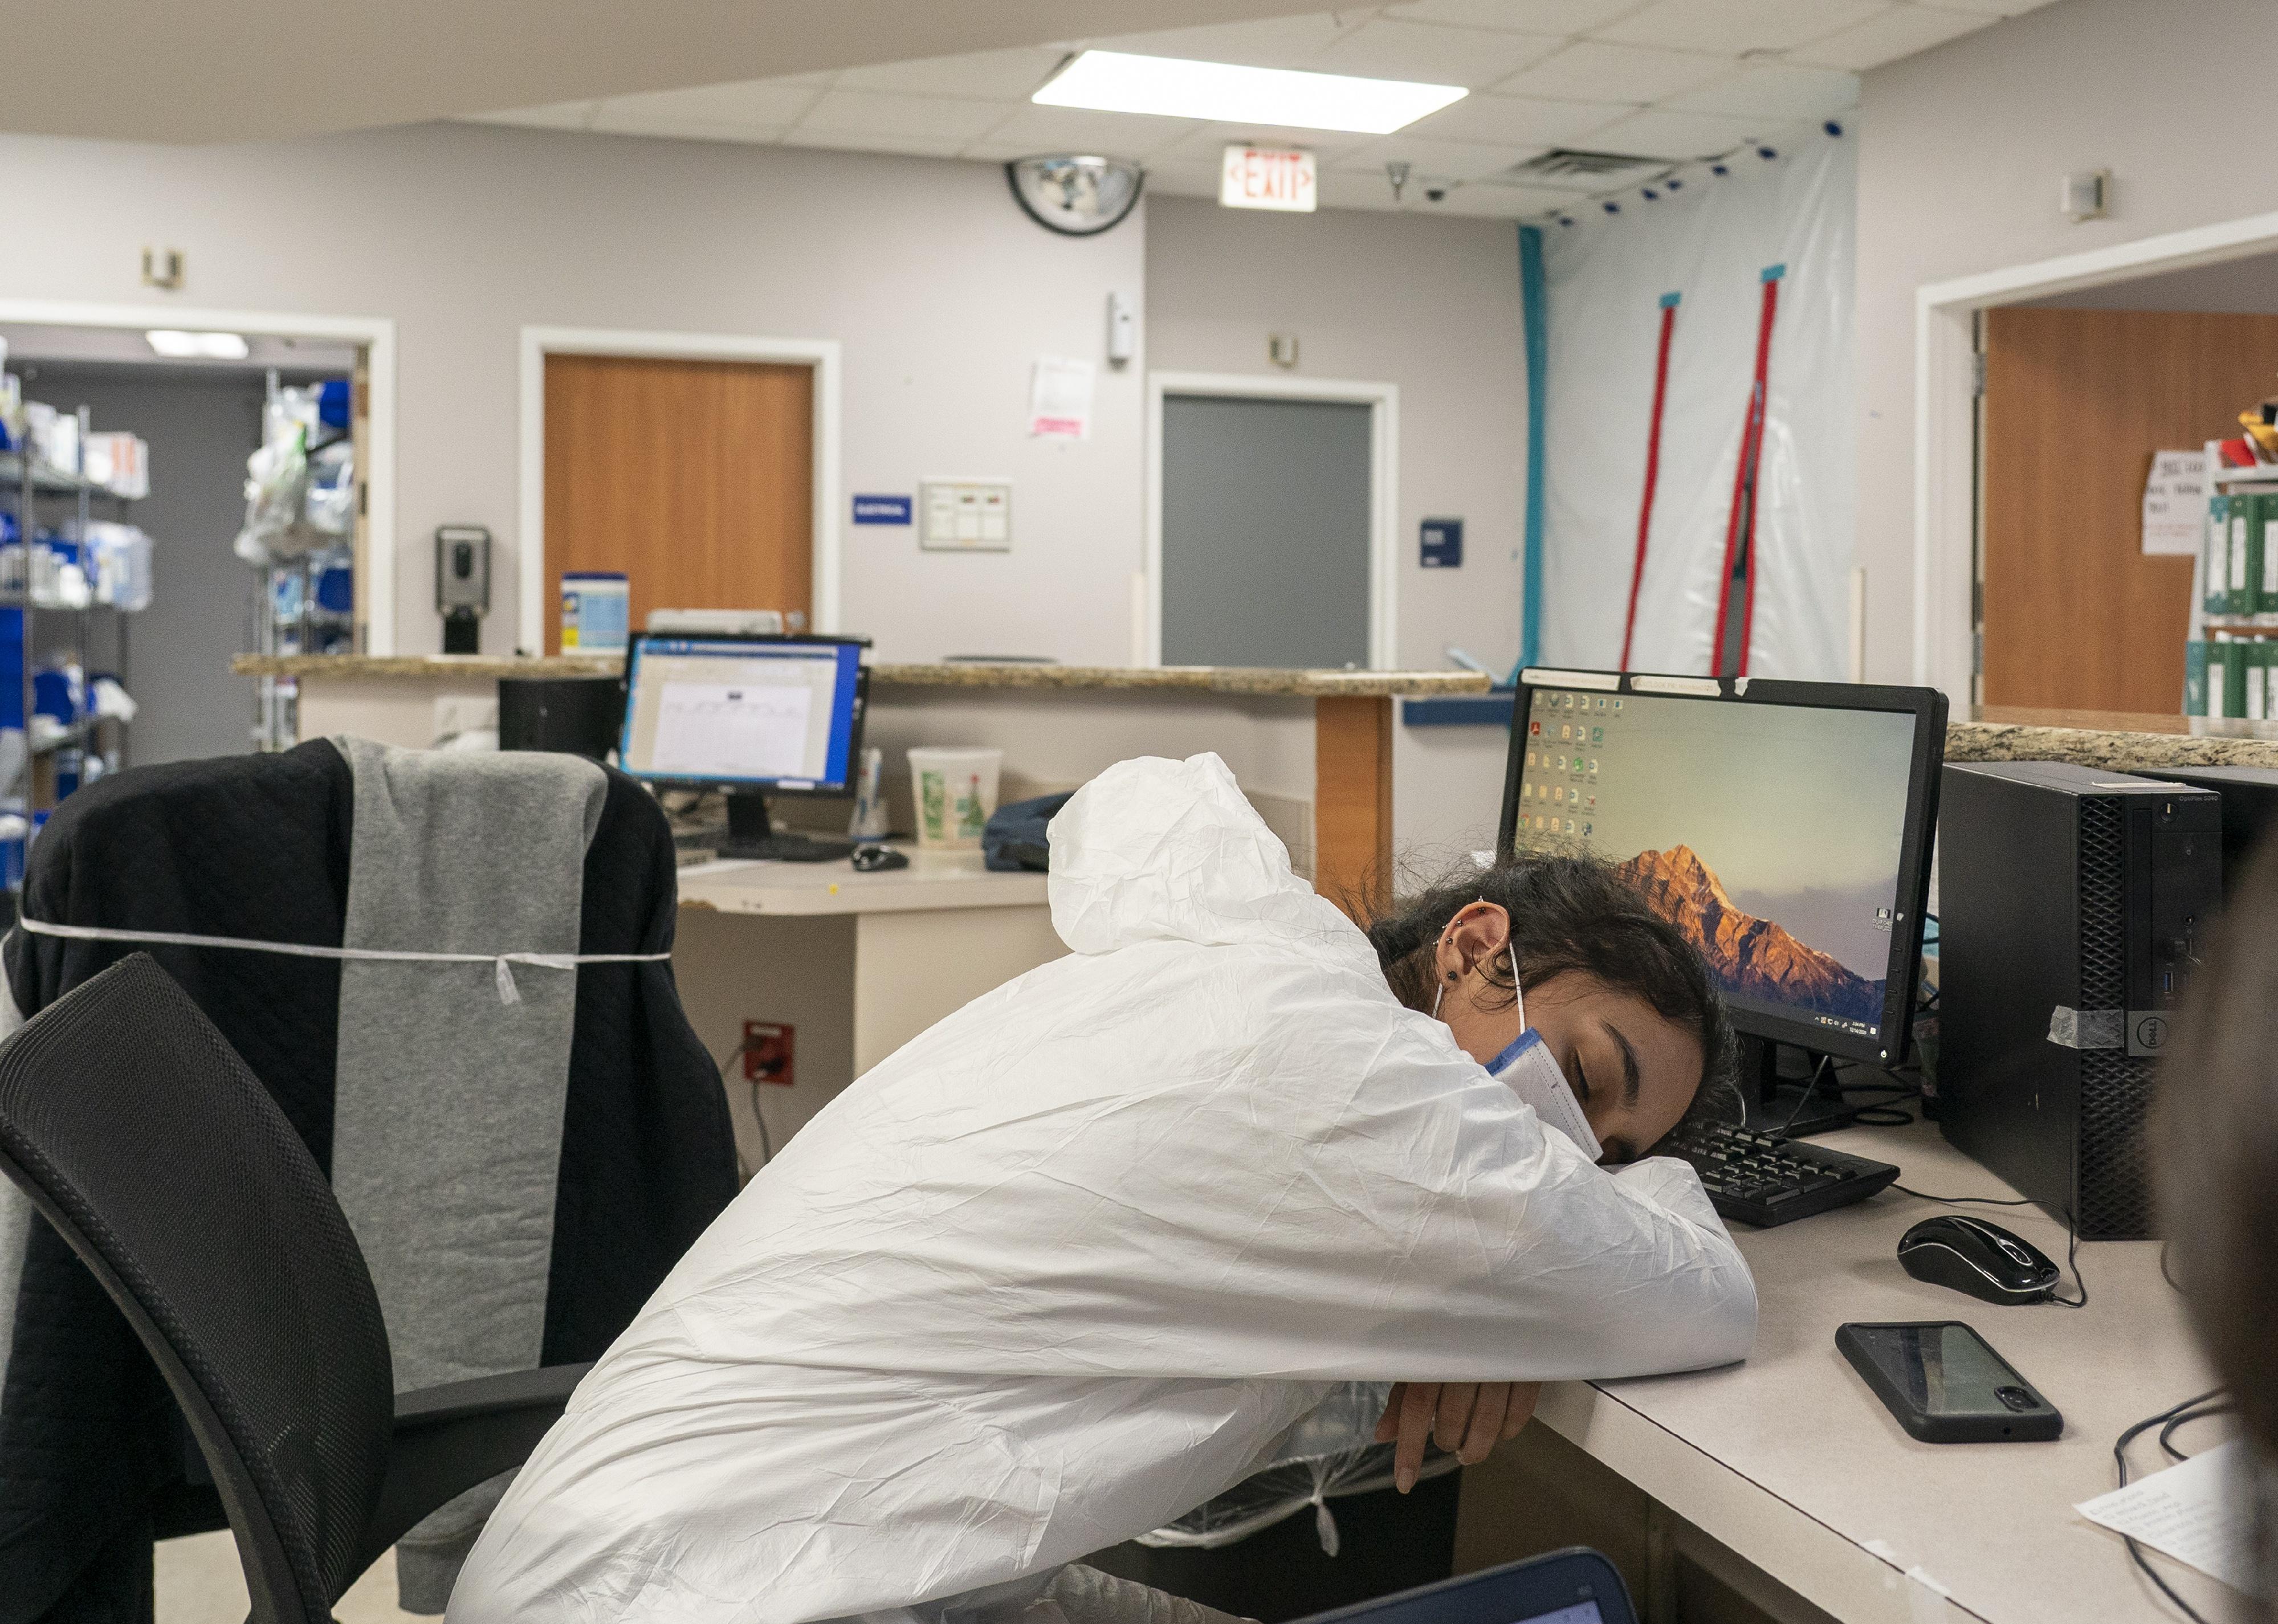 A nurse asleep on a desk with no other people in the room.